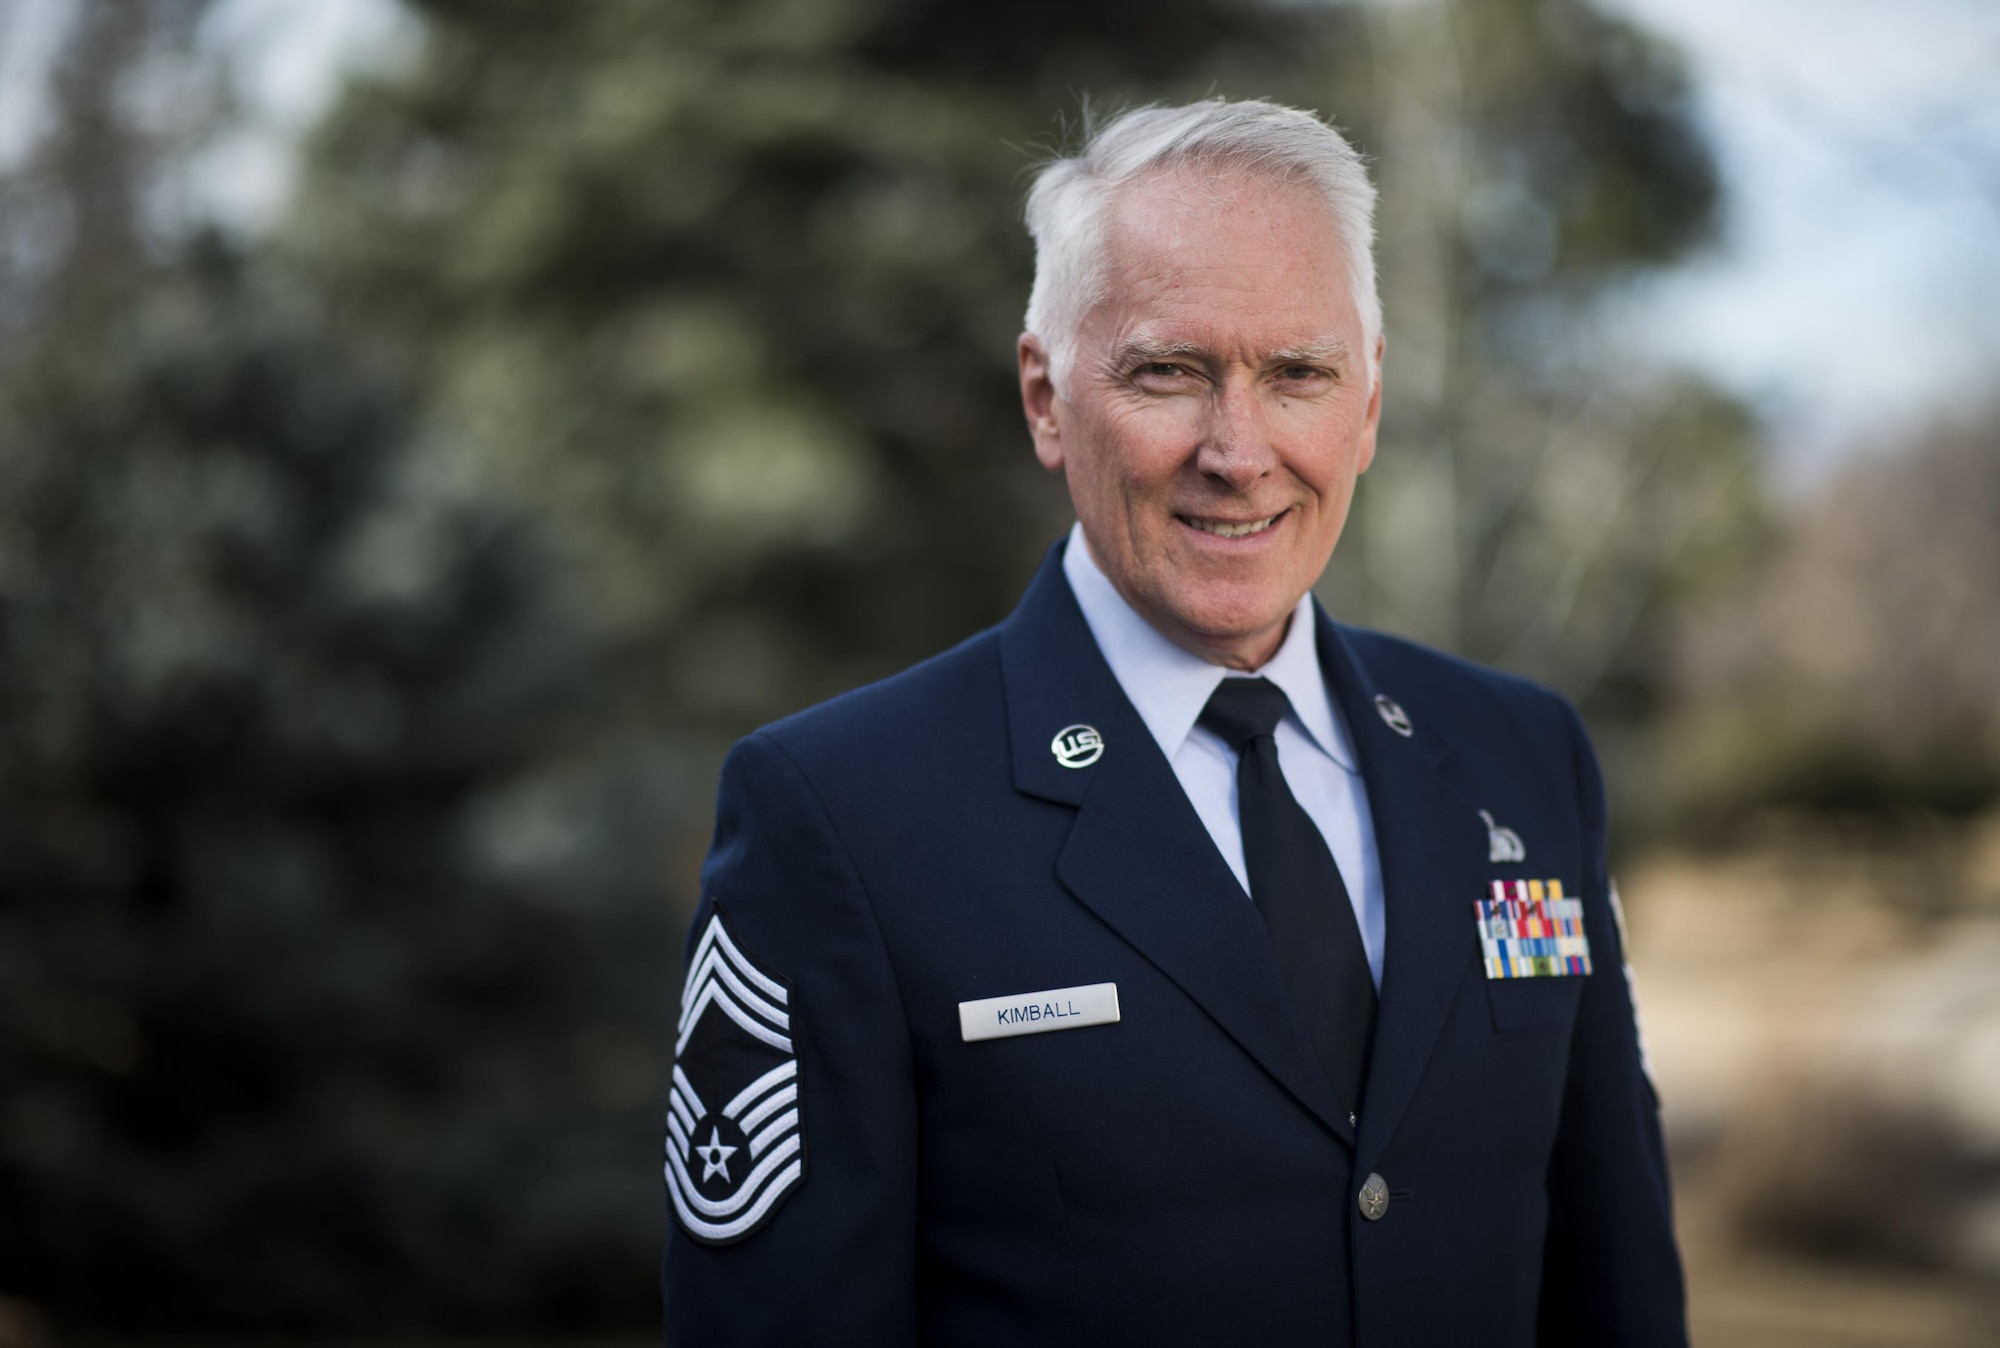 Chief Master Sgt. Tom Kimball retired from the Air Force Feb. 17, 2017 at Buckley Air Force Base, Co. Kimball served more than 24 years in the Air Force. (U.S. Air Force Photo/Tech. Sgt. David Salanitri)